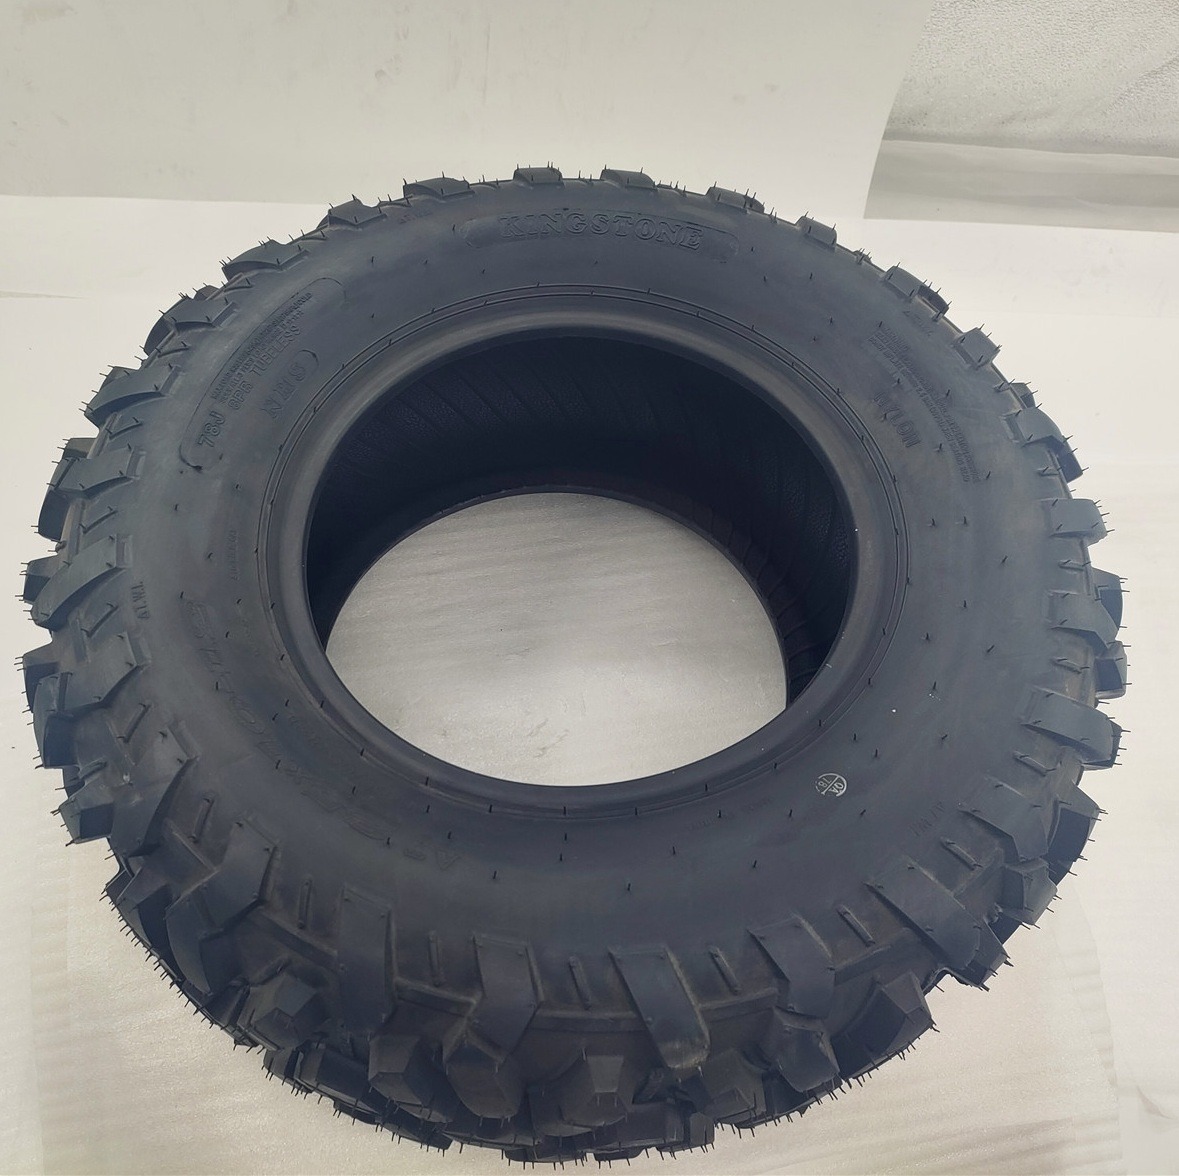 China factory 3 wheels motorcycle tire other wheel High Quality Tire Casing Black Rubber Material Origin Type Valve Size